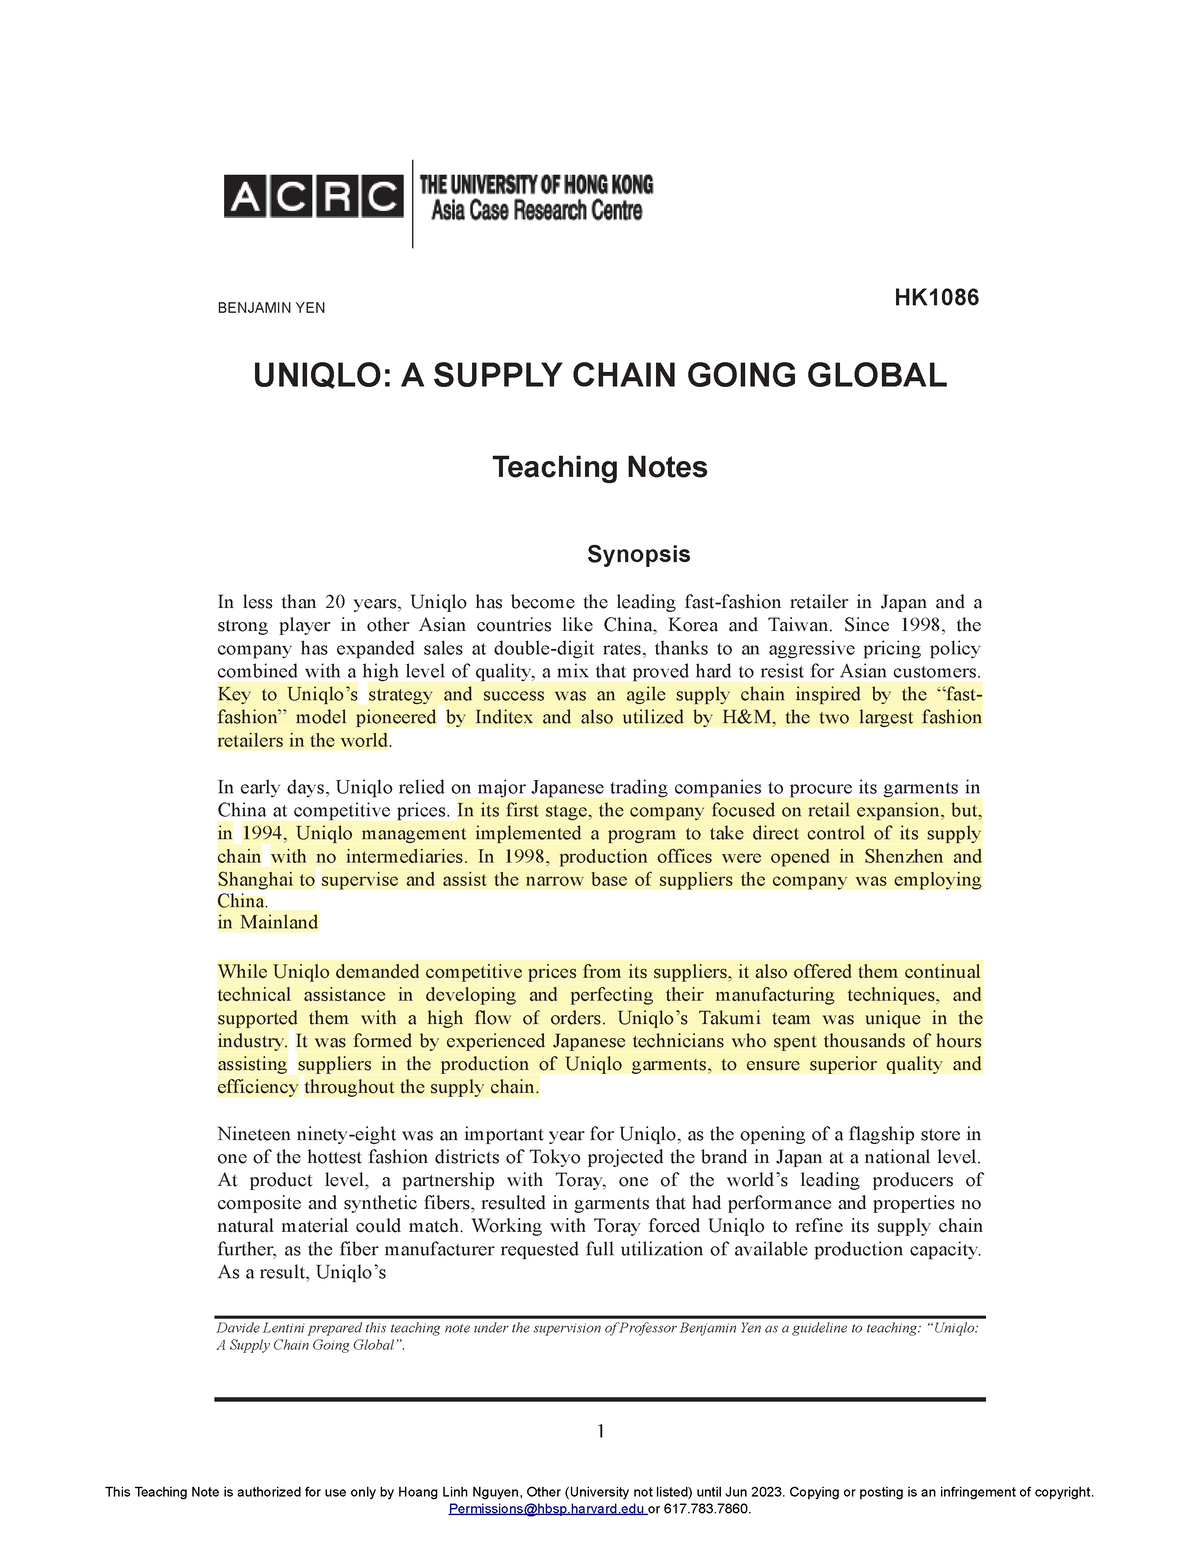 Uniqlo - Global supply chain-teaching note - 1 This Teaching Note is ...